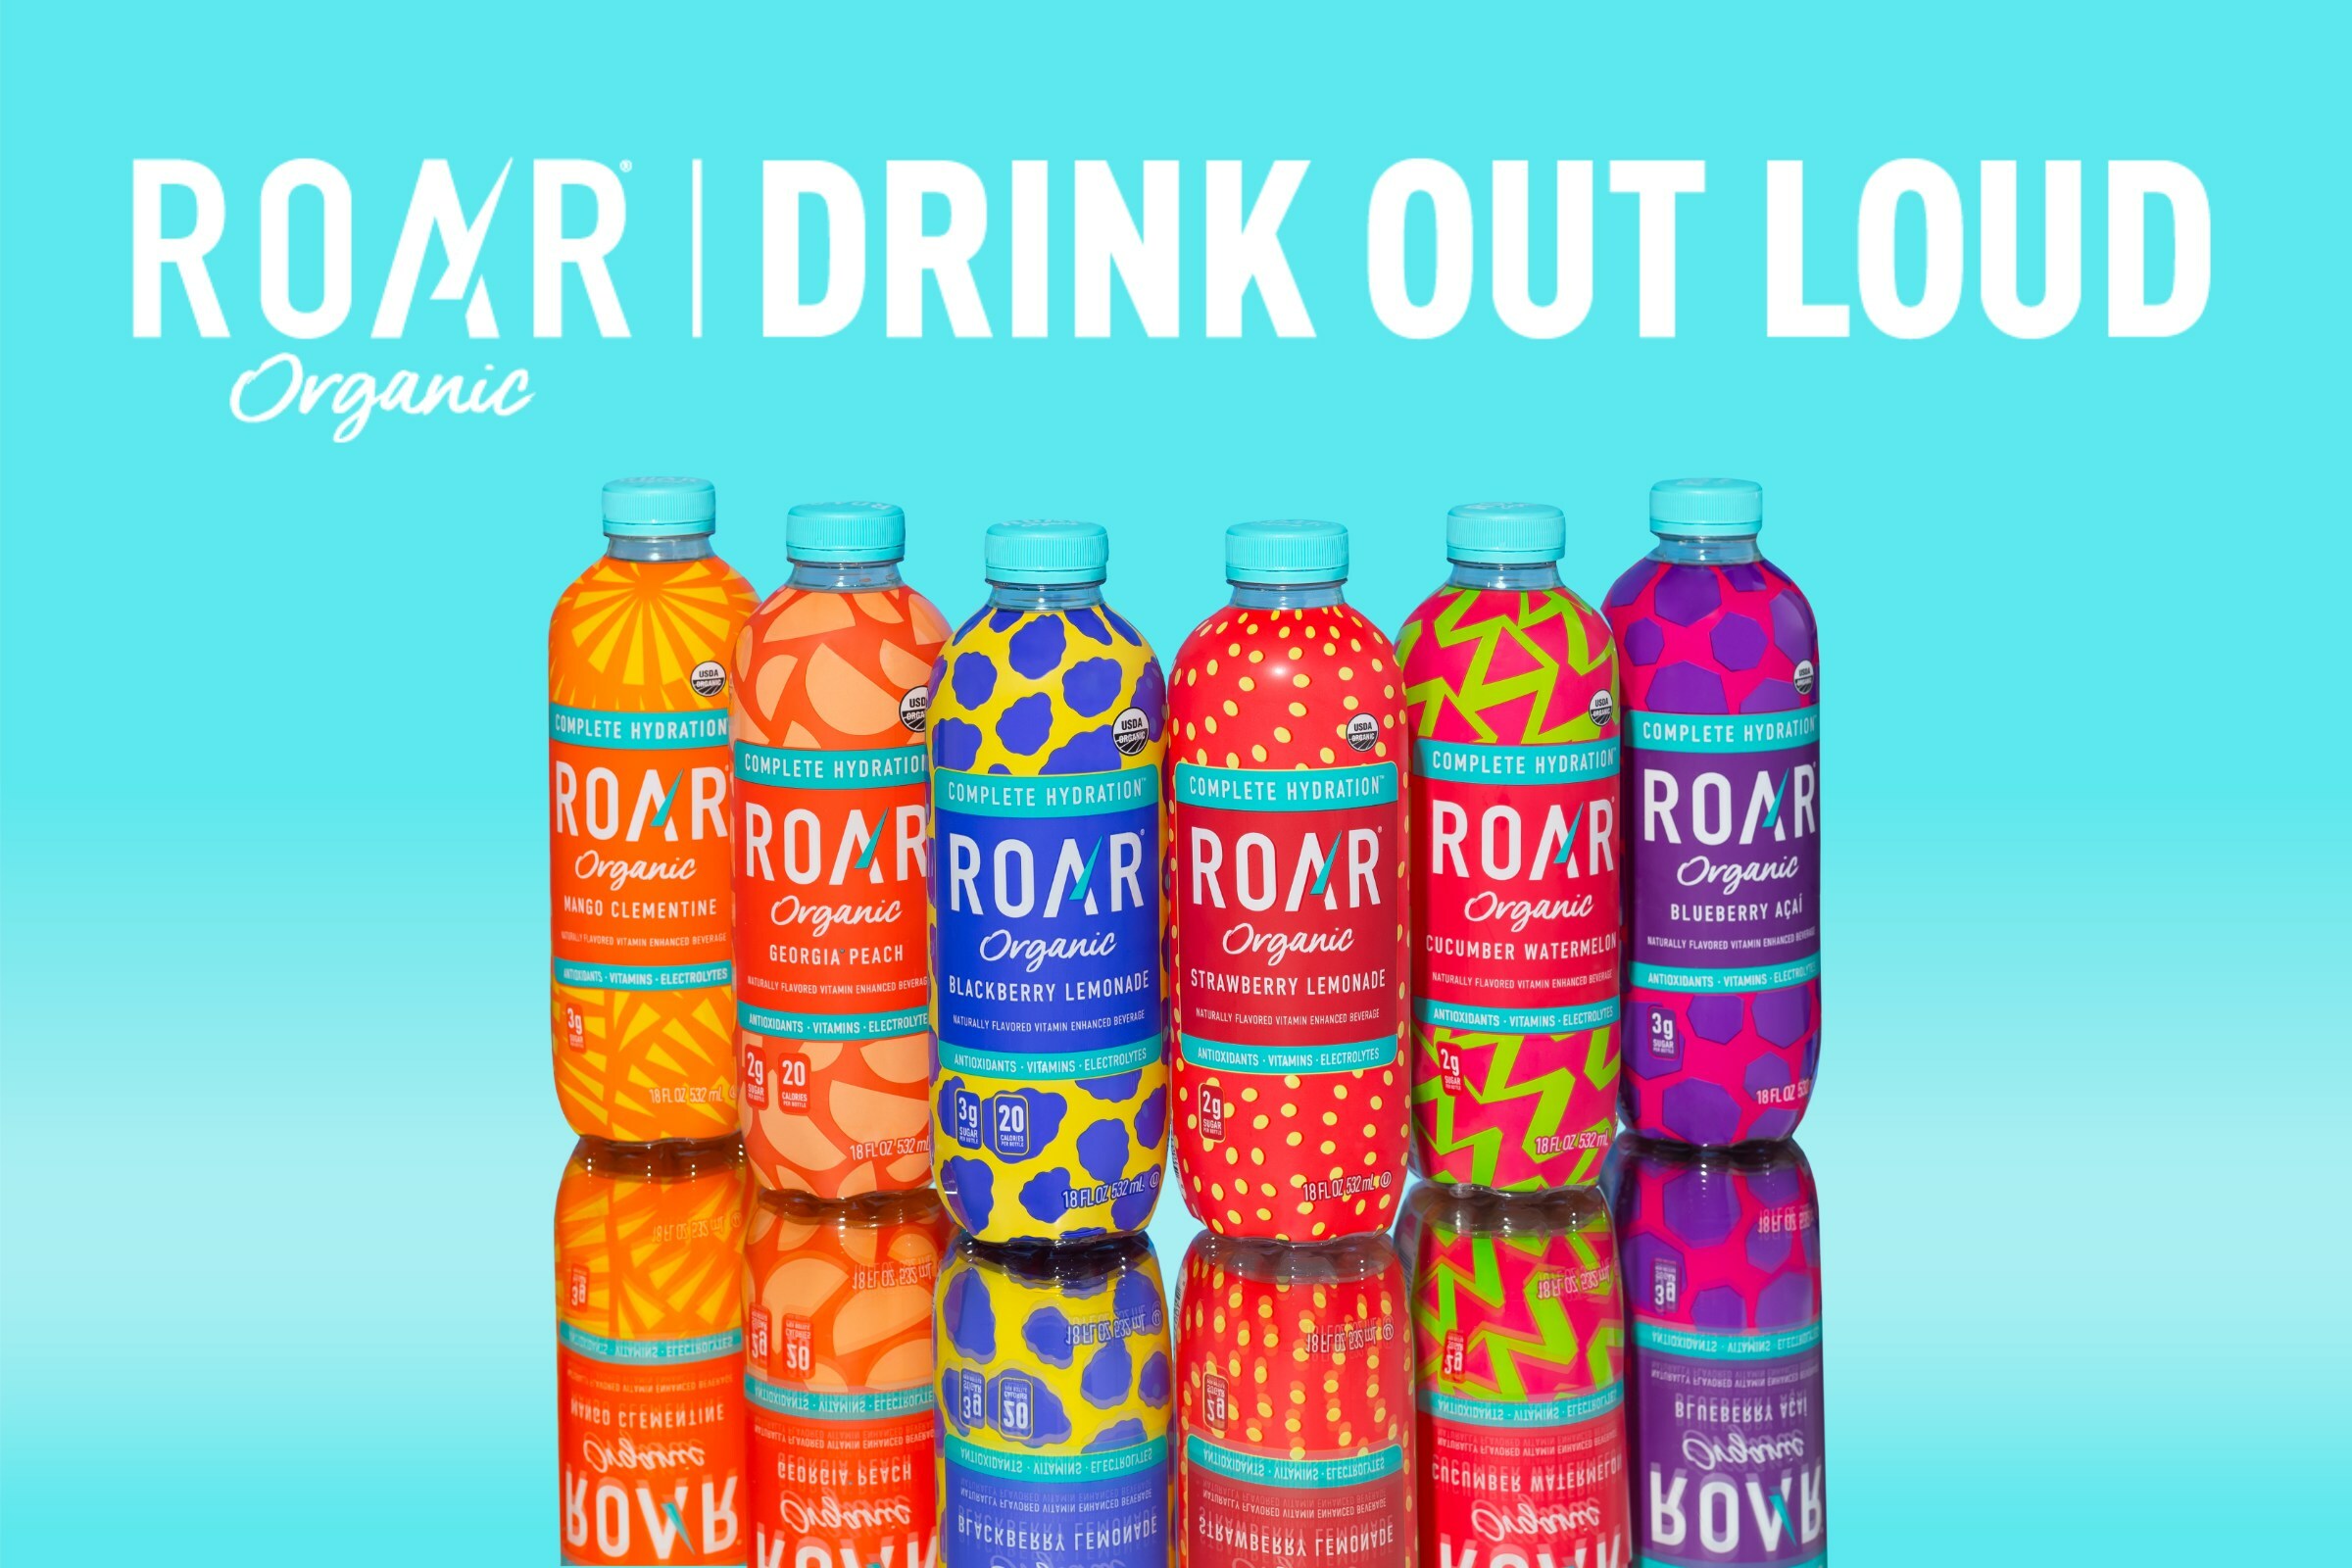 Following a Record-Breaking 2023, ROAR® Organic Secures $10 Million Investment from Factory LLC